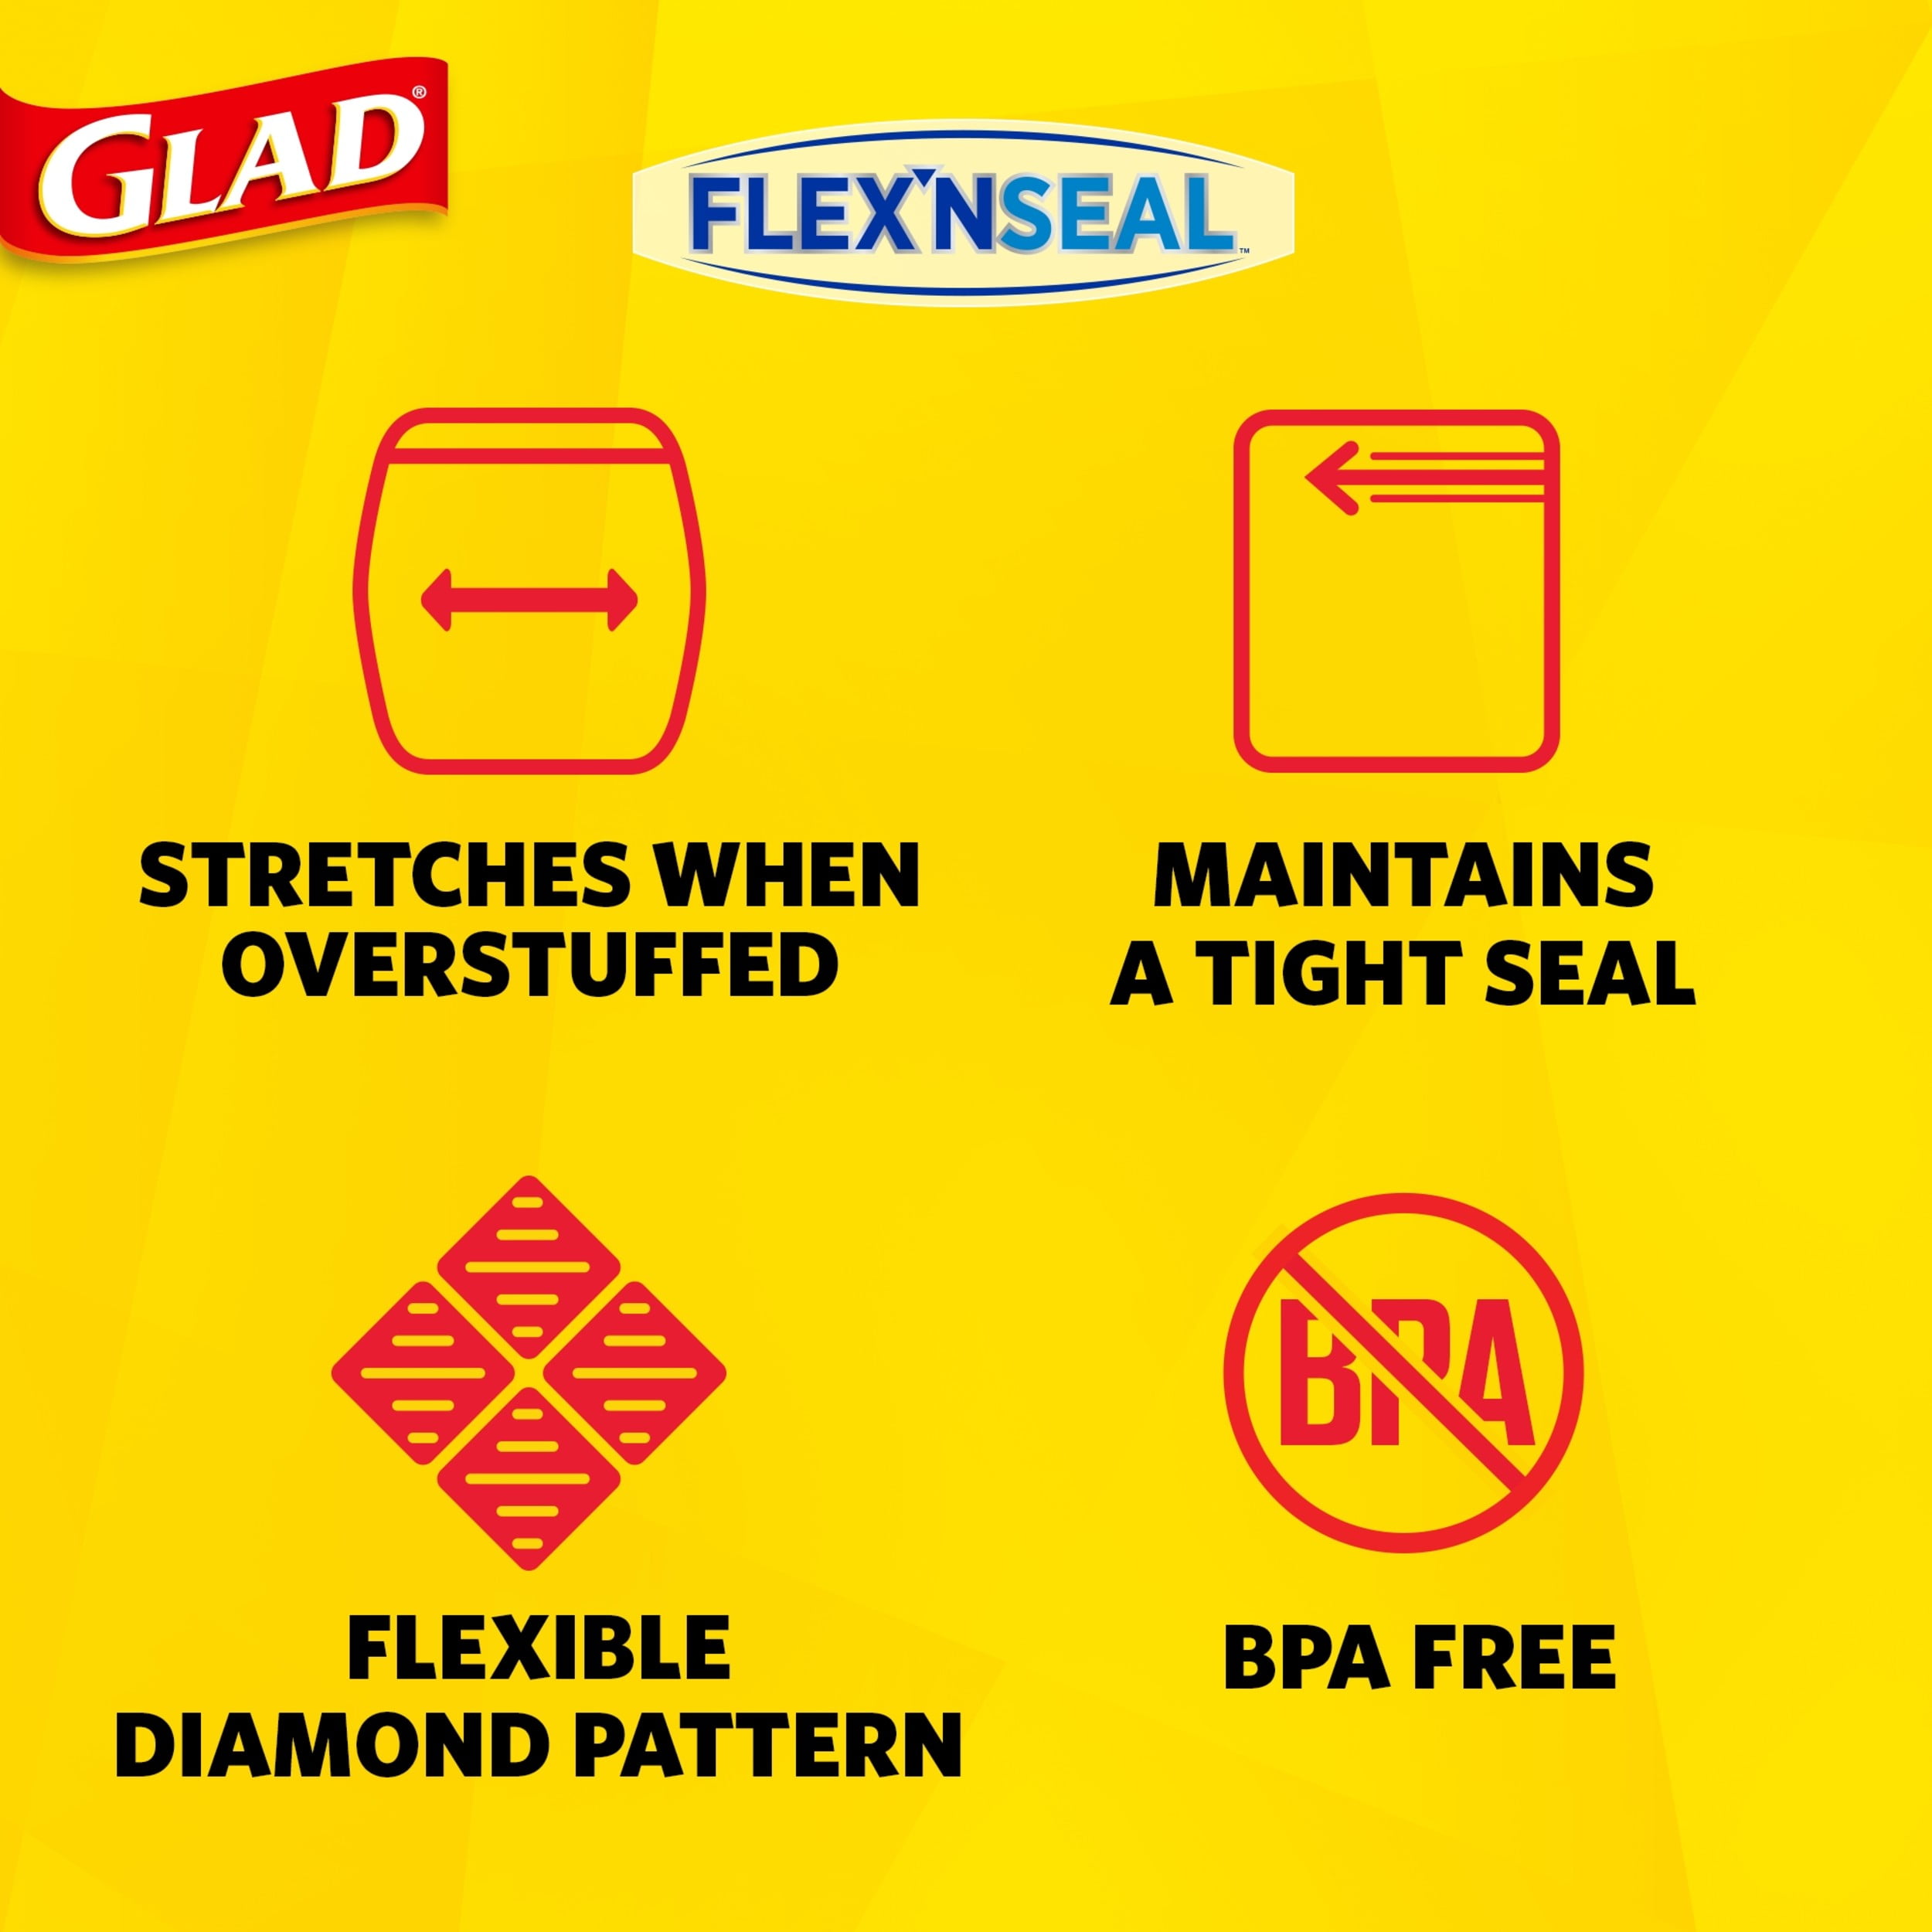 Glad® Food Storage Bags, 0.4 qt, 3.25 x 9.31, Clear, 50 Bags/Box, 12  Boxes/Carton at OSI